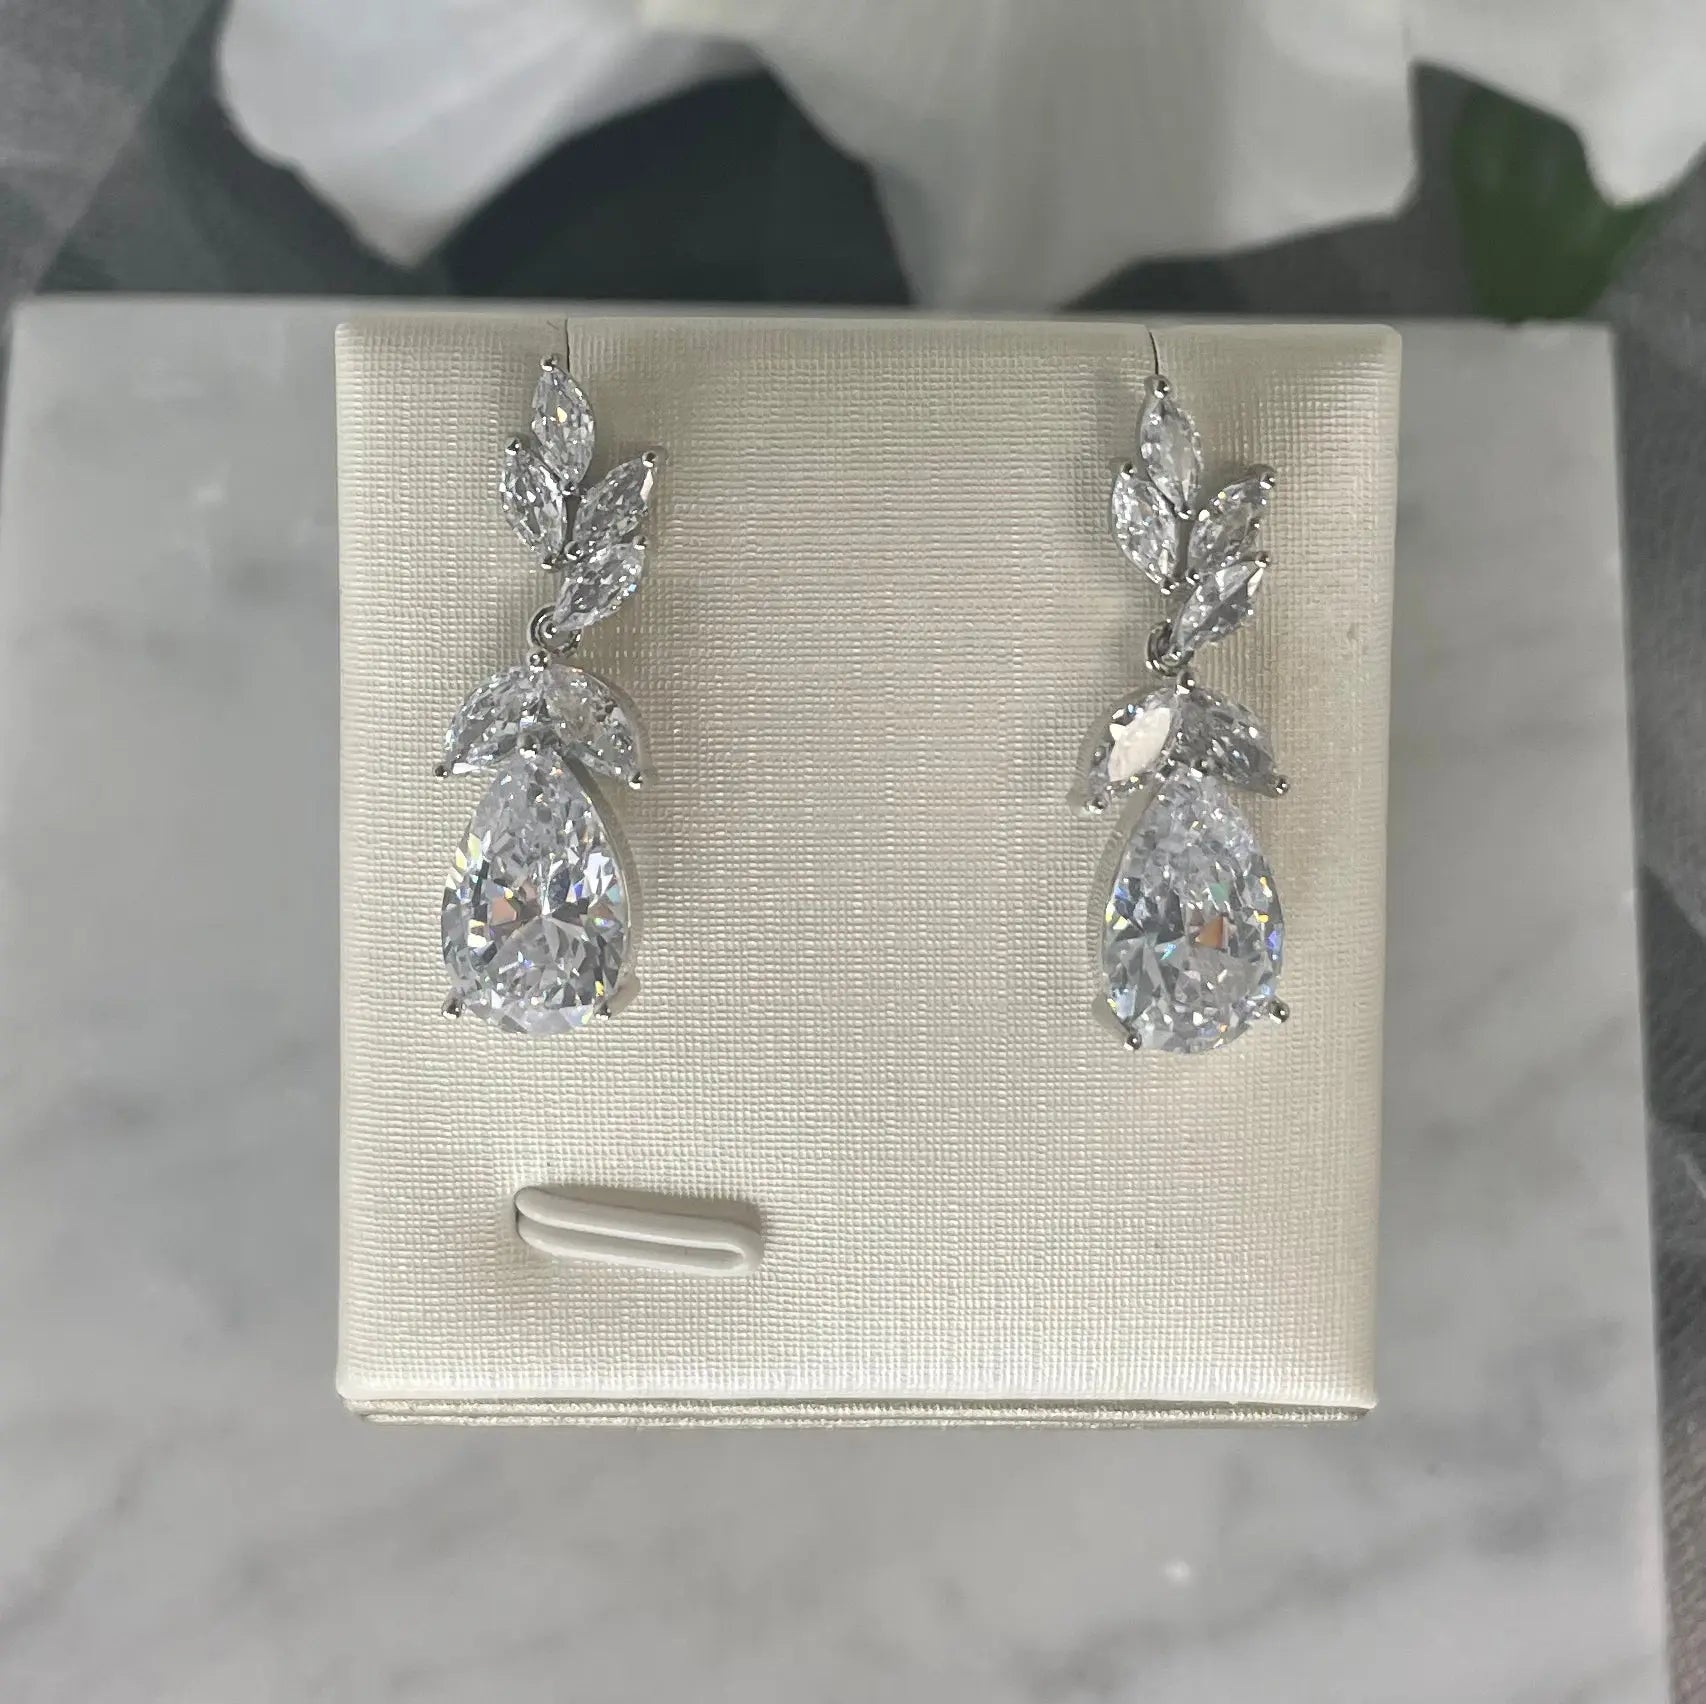 Maisie Earrings on Display: A photo of the Maisie CZ Drop Bridal Wedding Earrings elegantly displayed, highlighting their luxurious and sophisticated look.